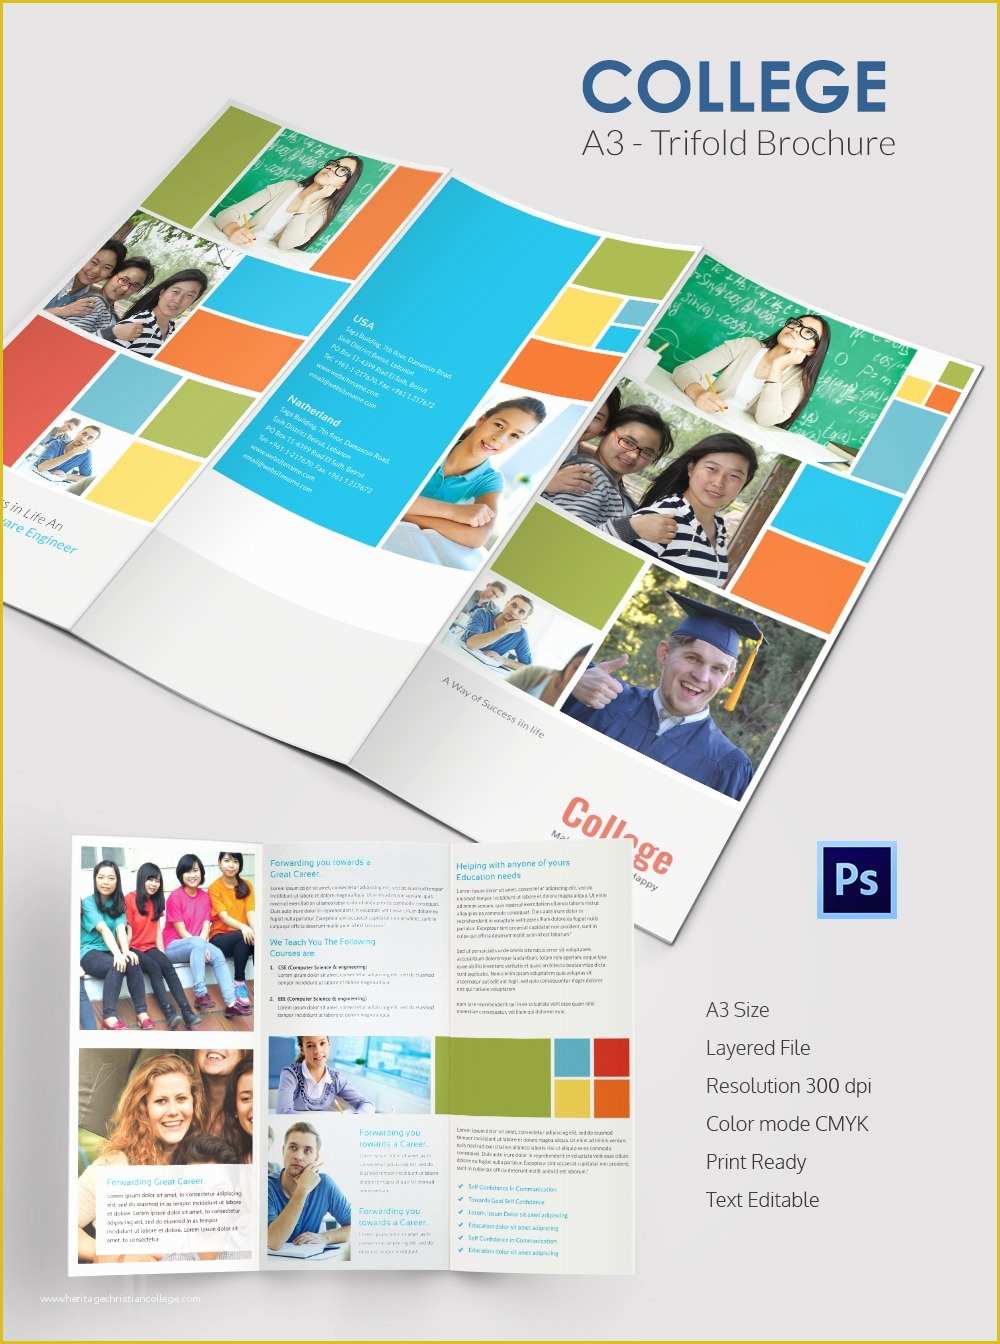 Free Brochure Design Templates Of College Brochure Template – 34 Free Jpg Psd Indesign